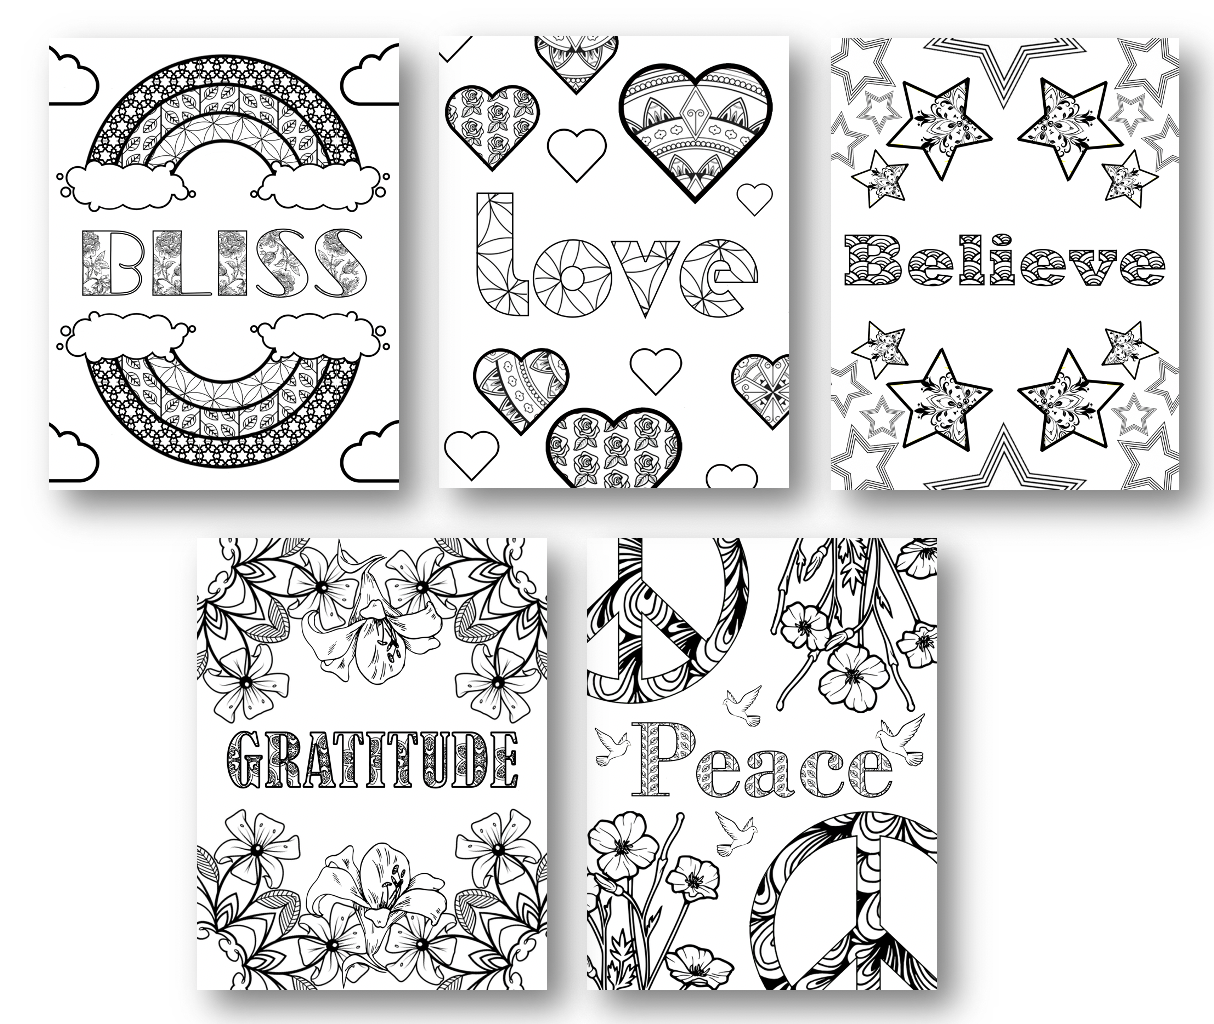 5 Free Coloring Pages with PLR Rights